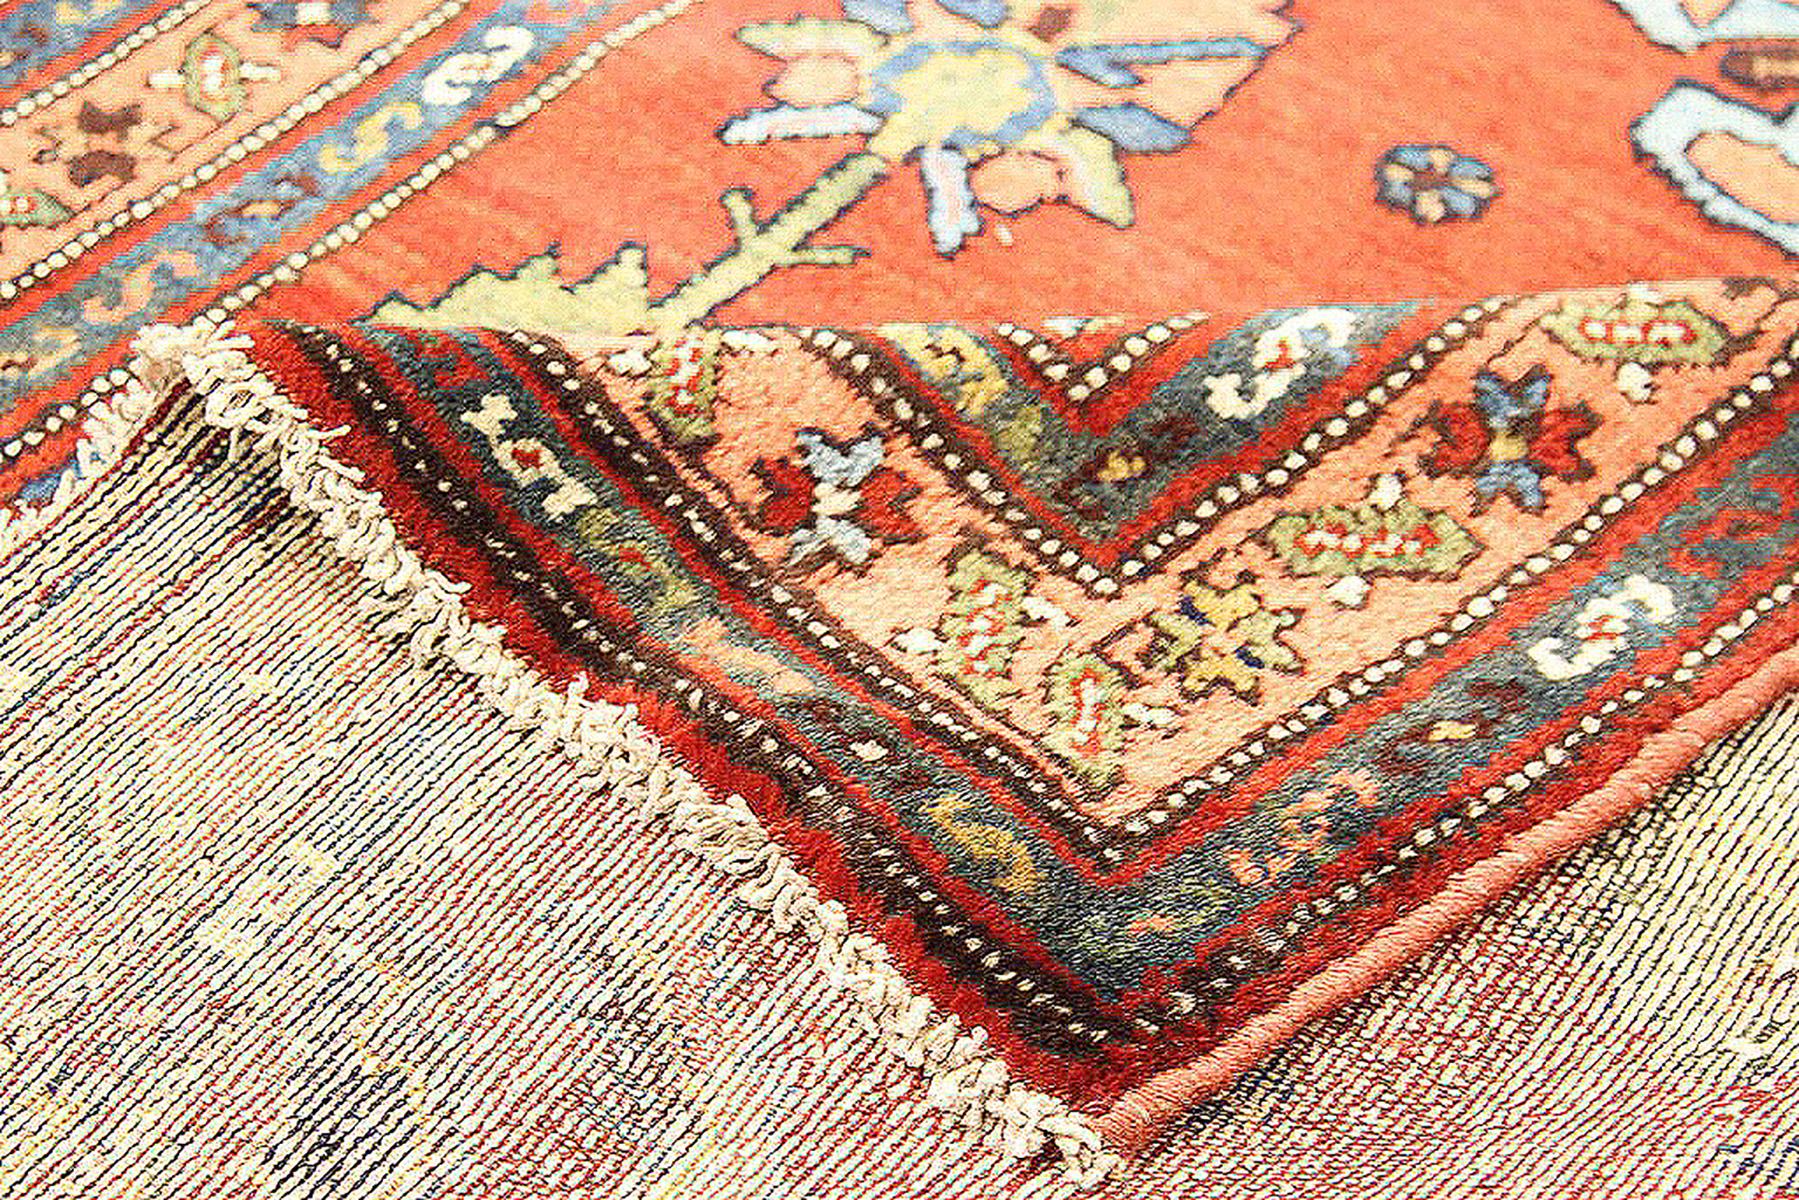 Hand-Woven Antique Persian Malayer Runner Rug with Blue & Green Floral Details on Red Field For Sale